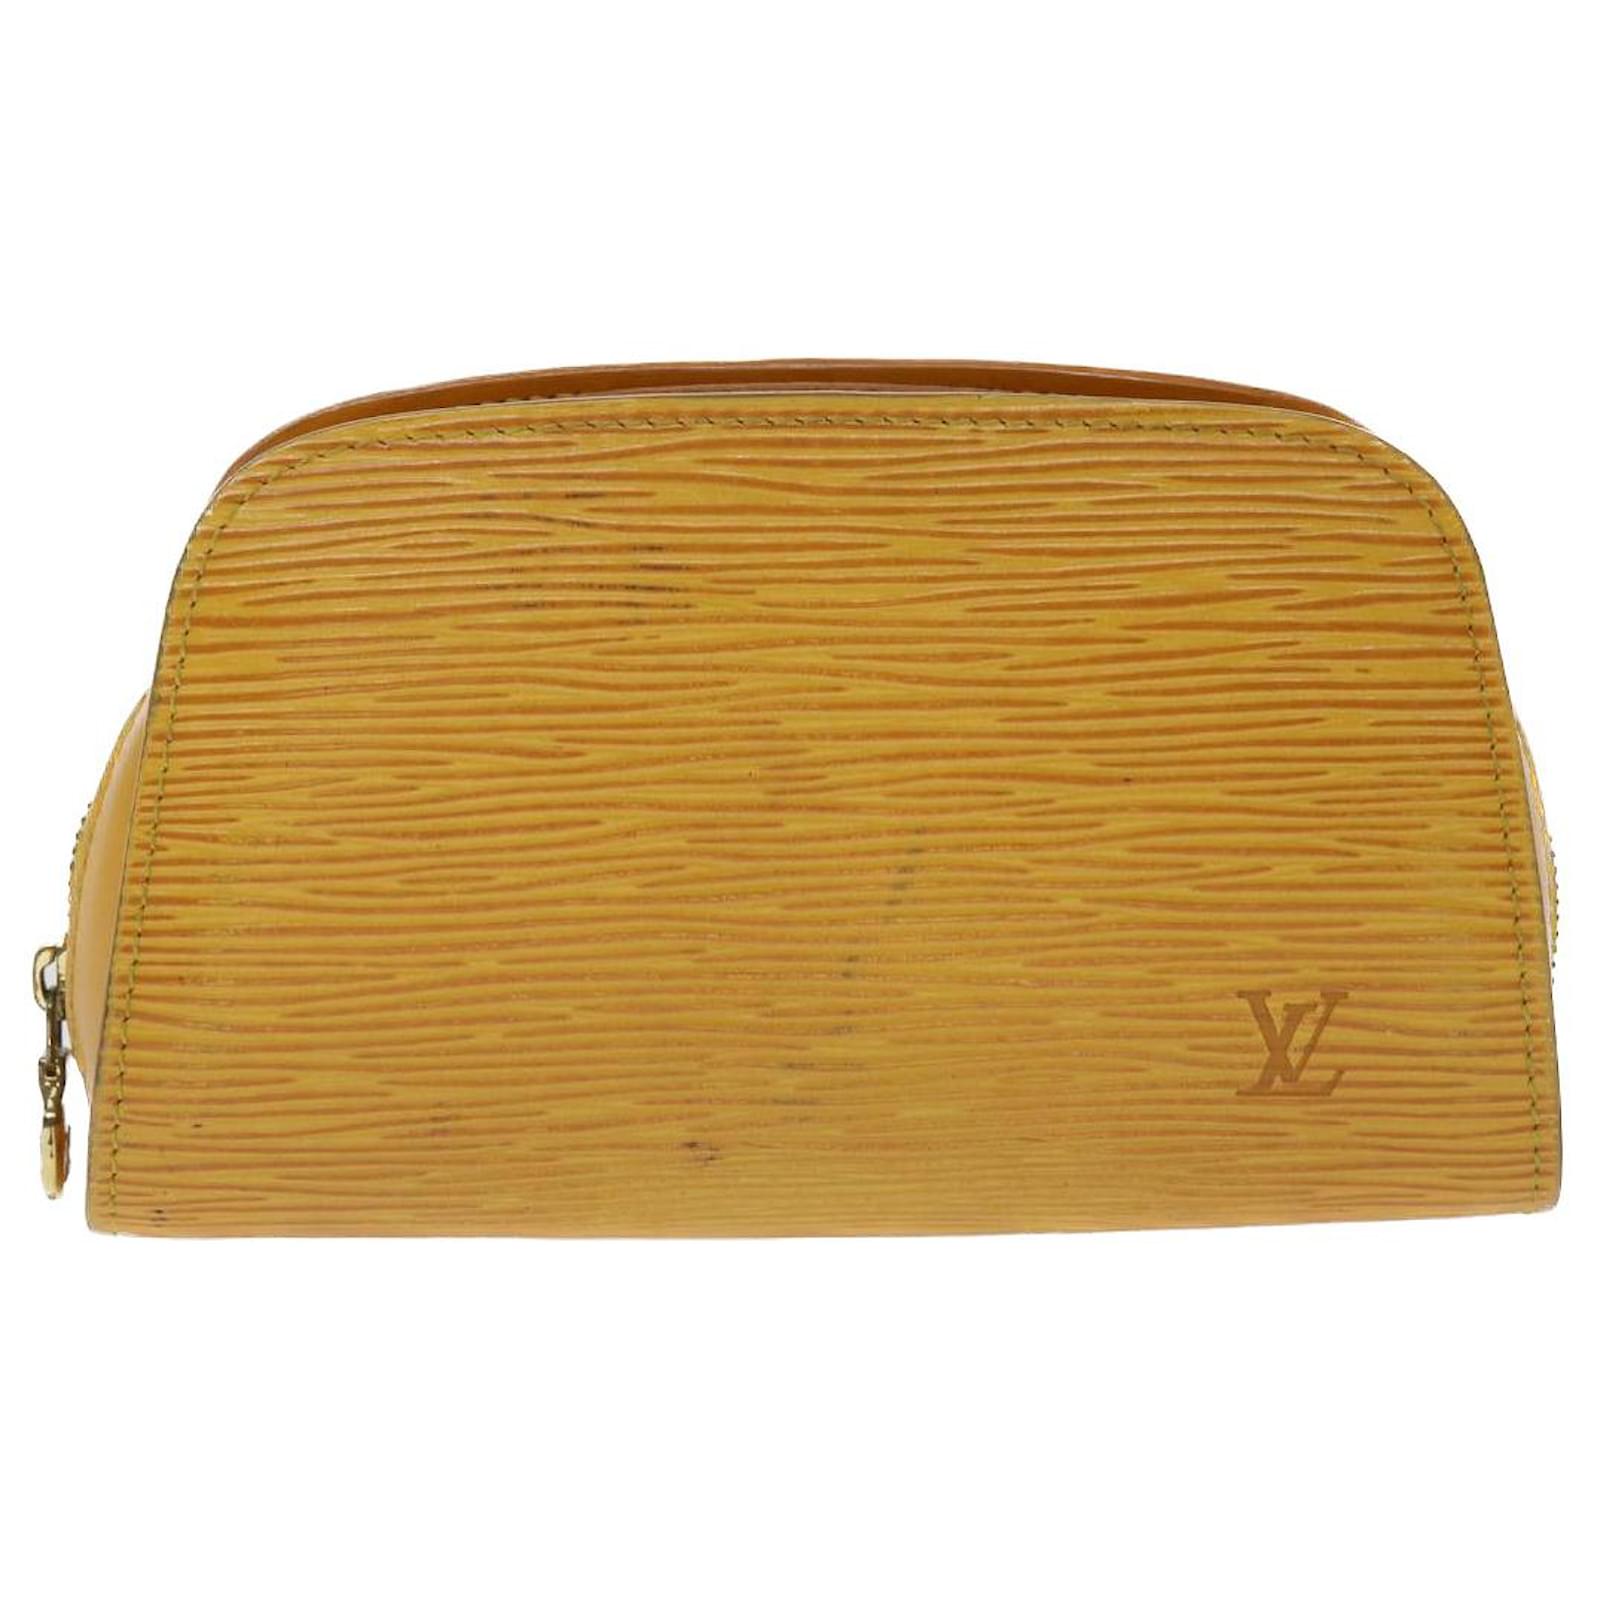 LOUIS VUITTON Epi Dauphine Leather Cosmetics Pouch Makeup Bag in Yellow  M48449